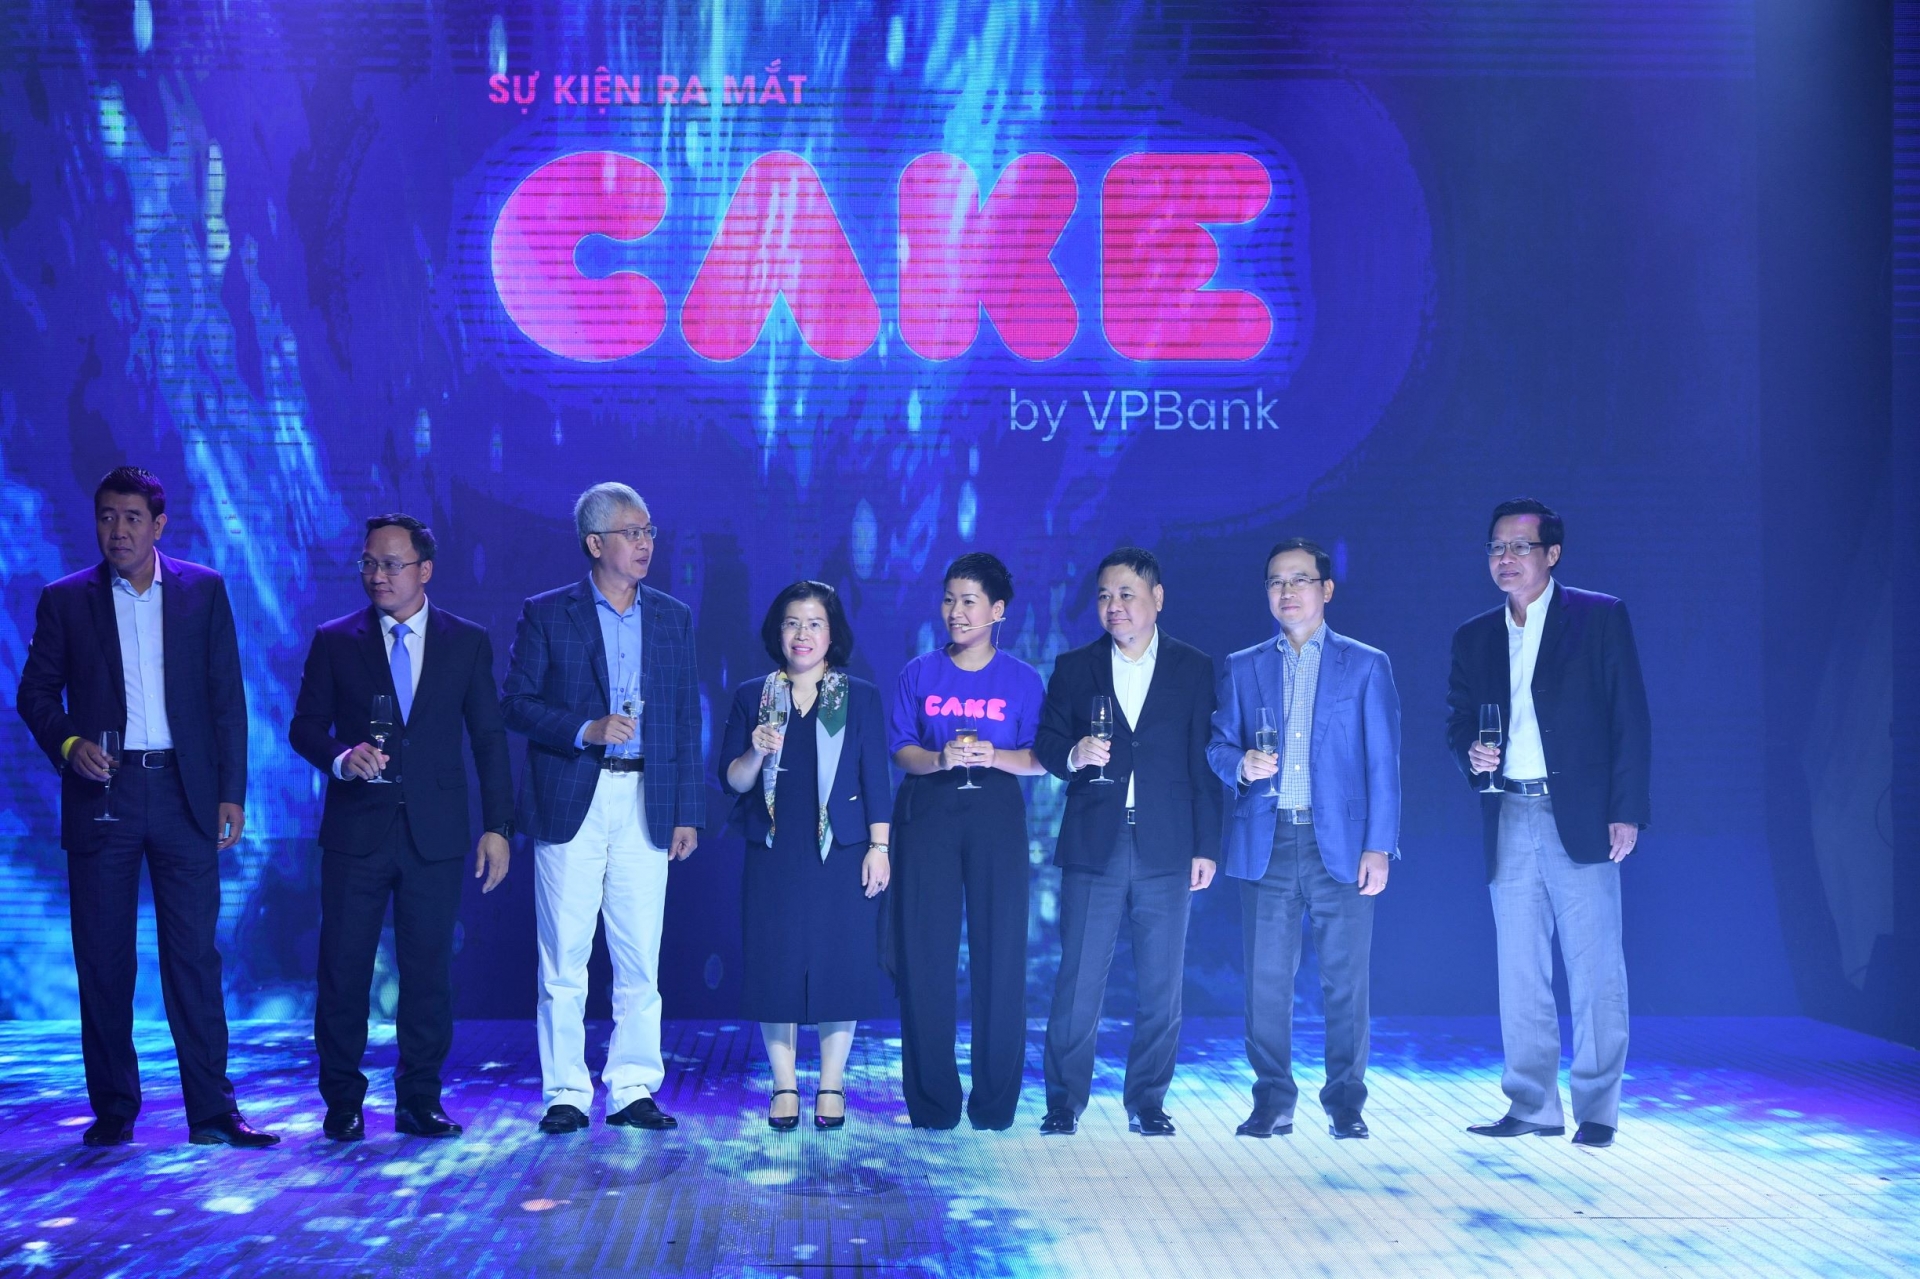 Be Group partnering up with VPBank to launch Cake digital bank